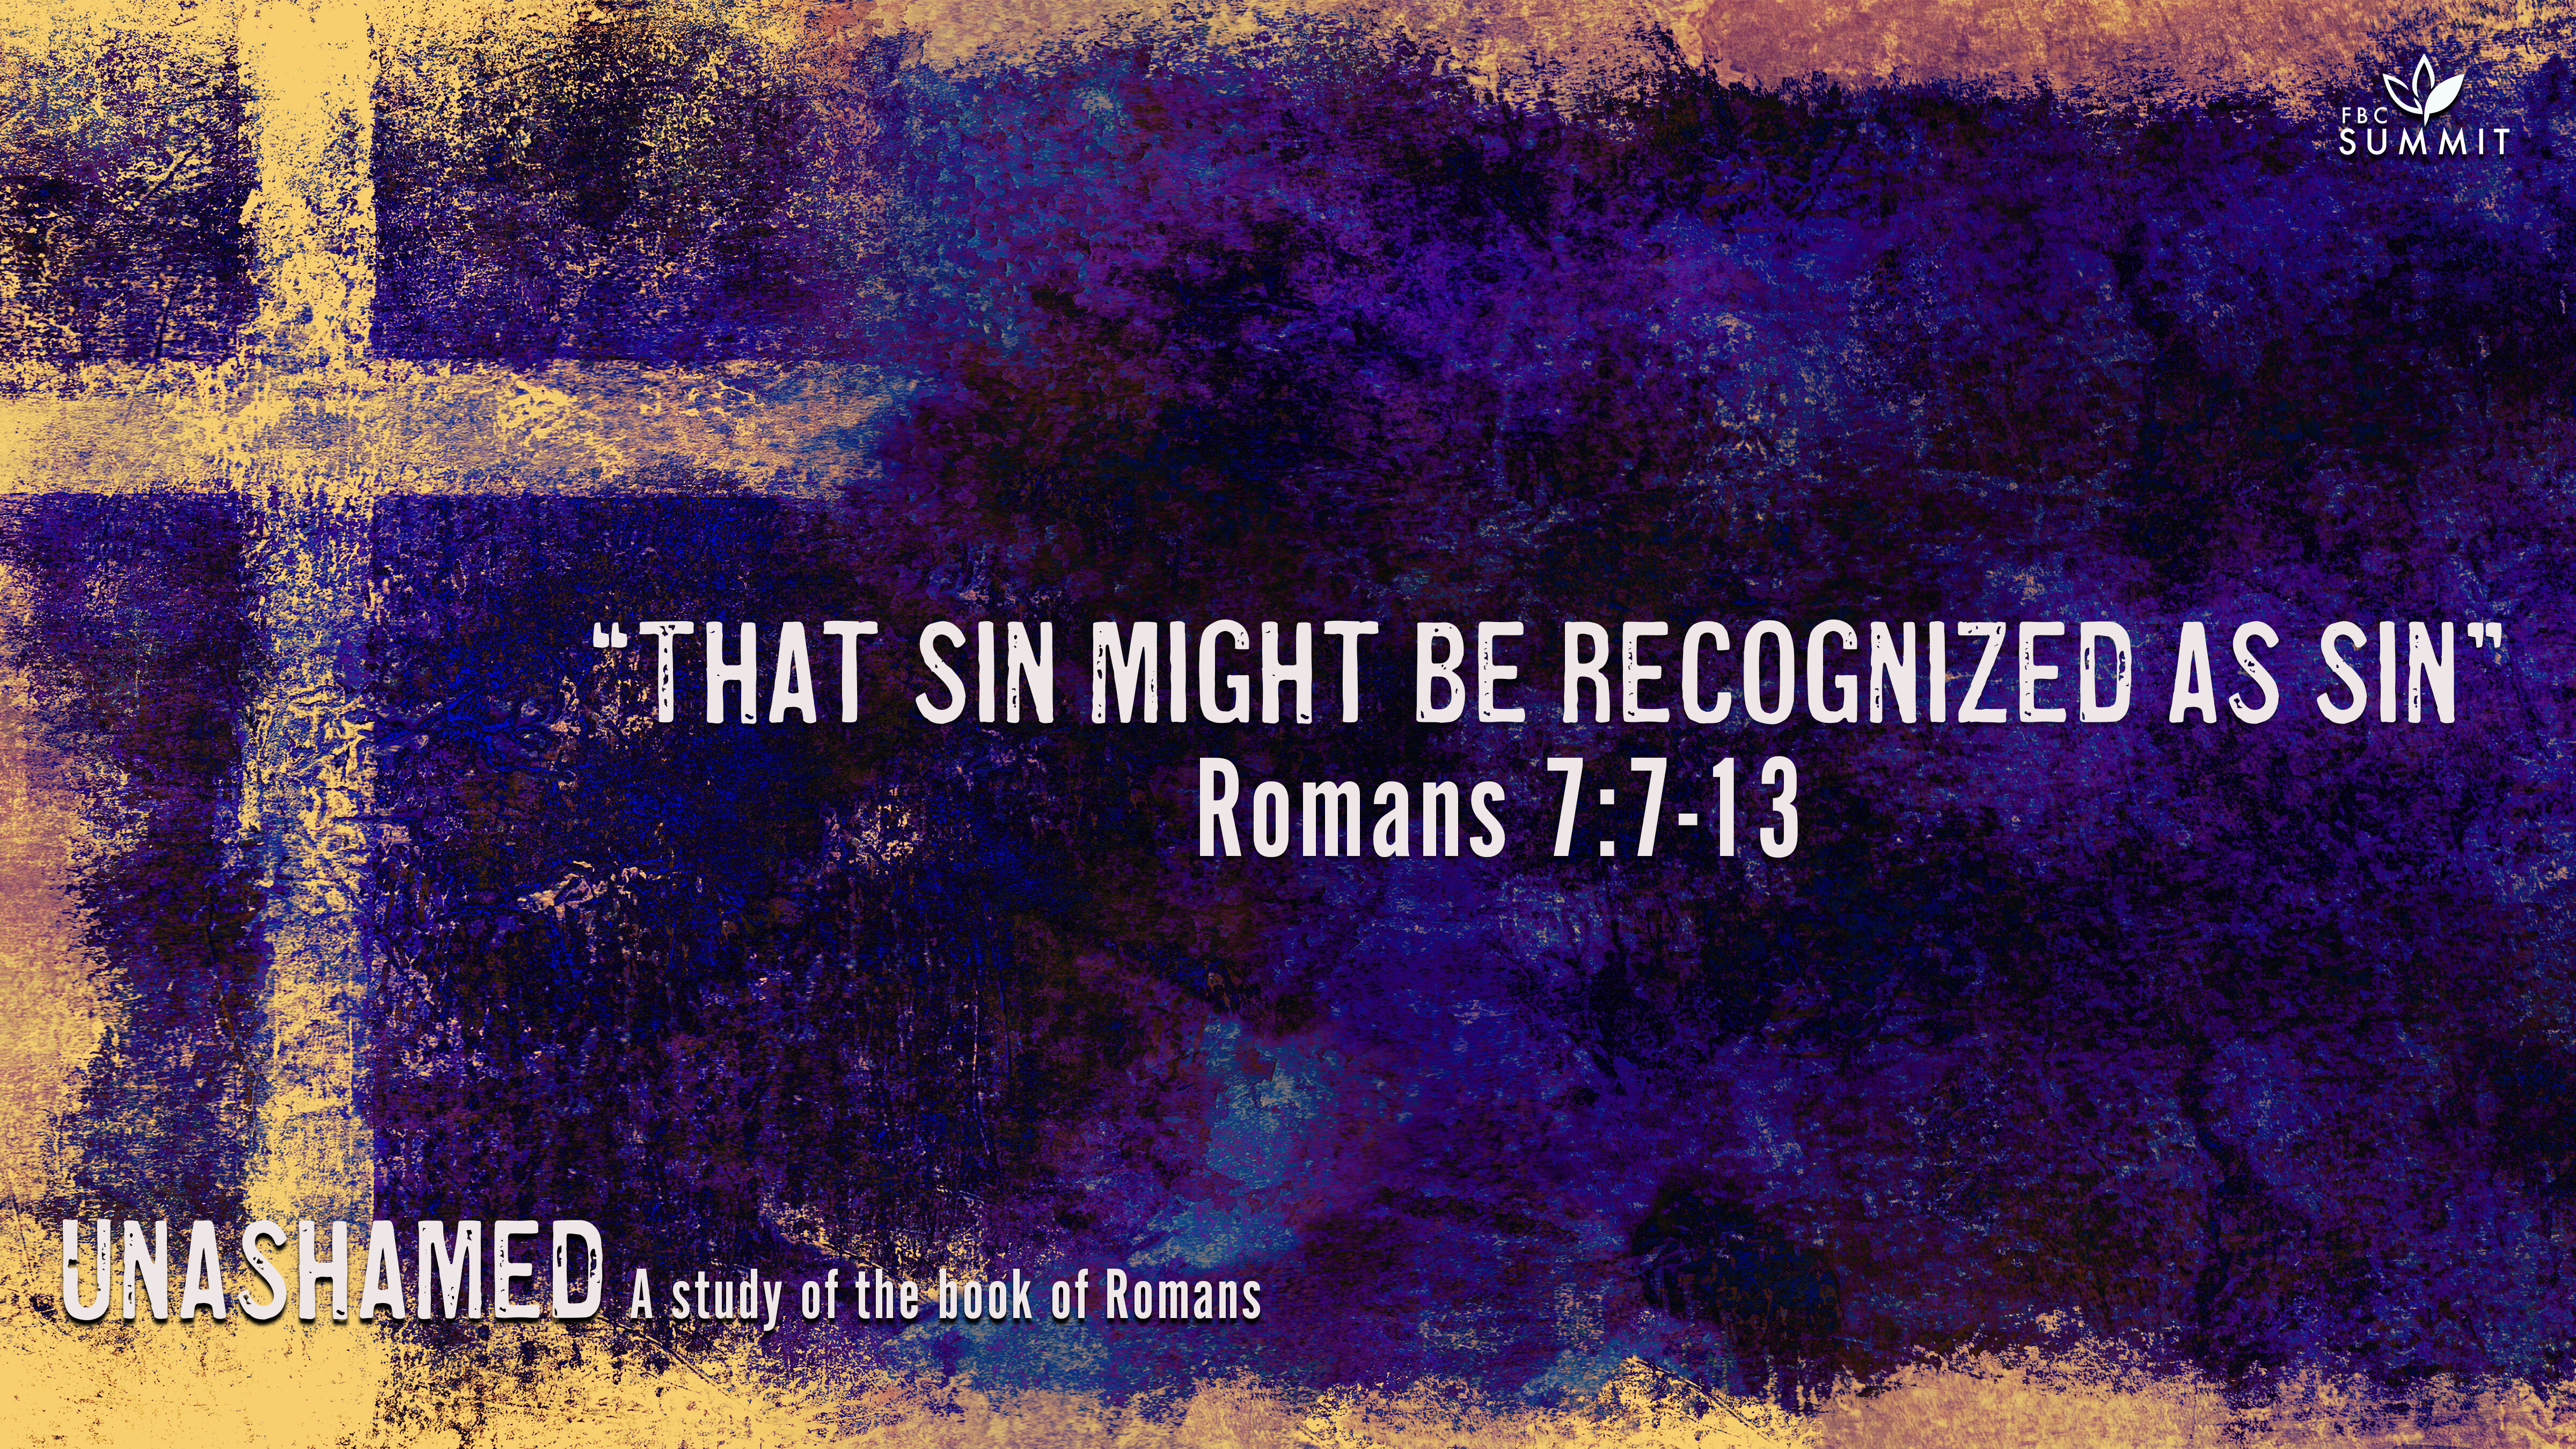 "That Sin Might be Recognized as Sin" Romans 7:7-13